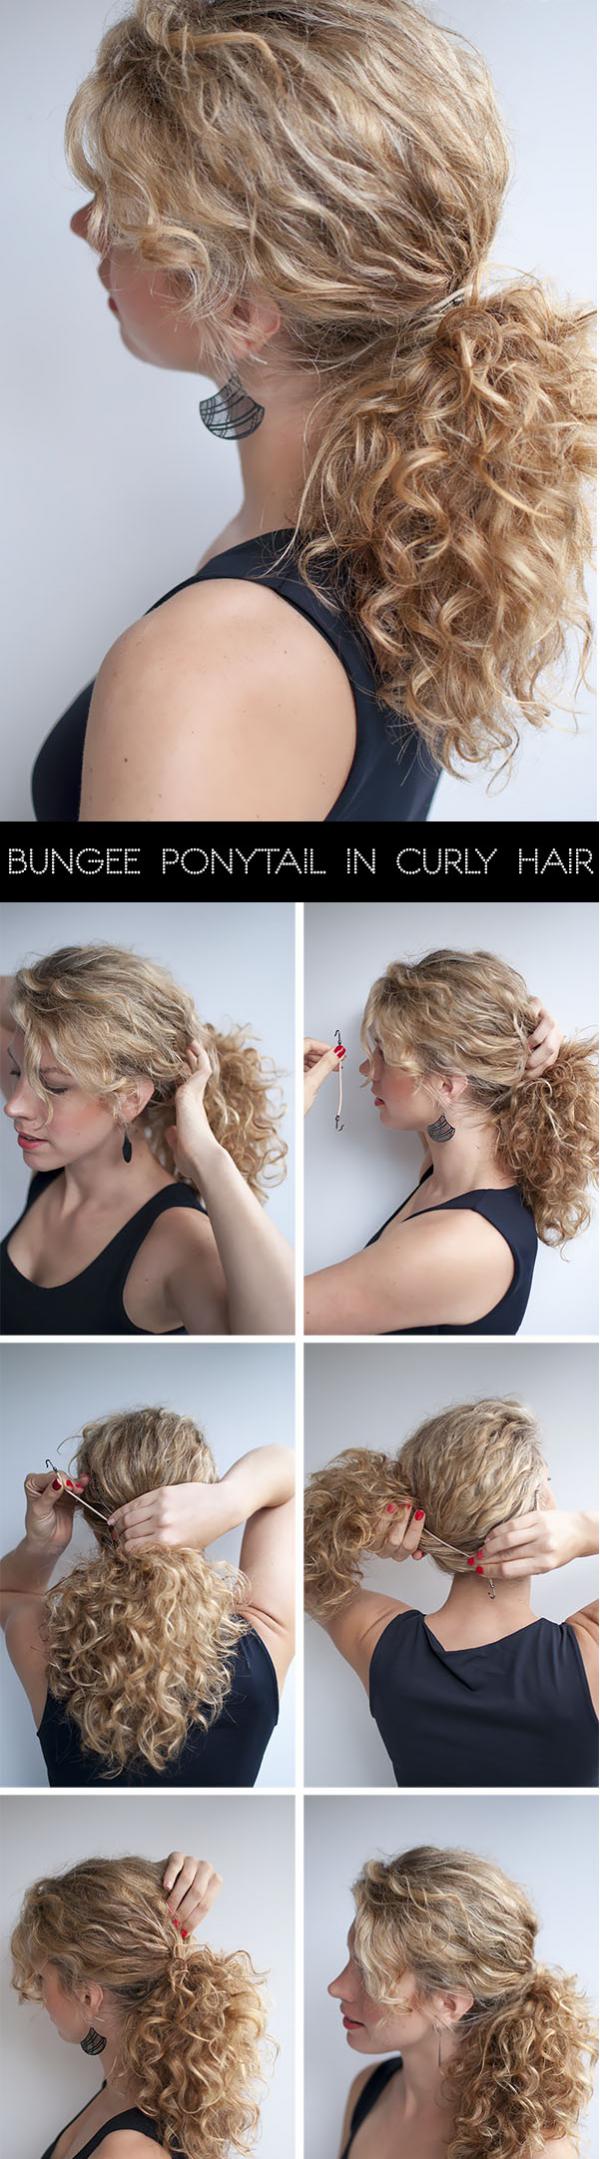 The Best Hairstyles For A Medium Length Sized Curly Hair - ViewKick